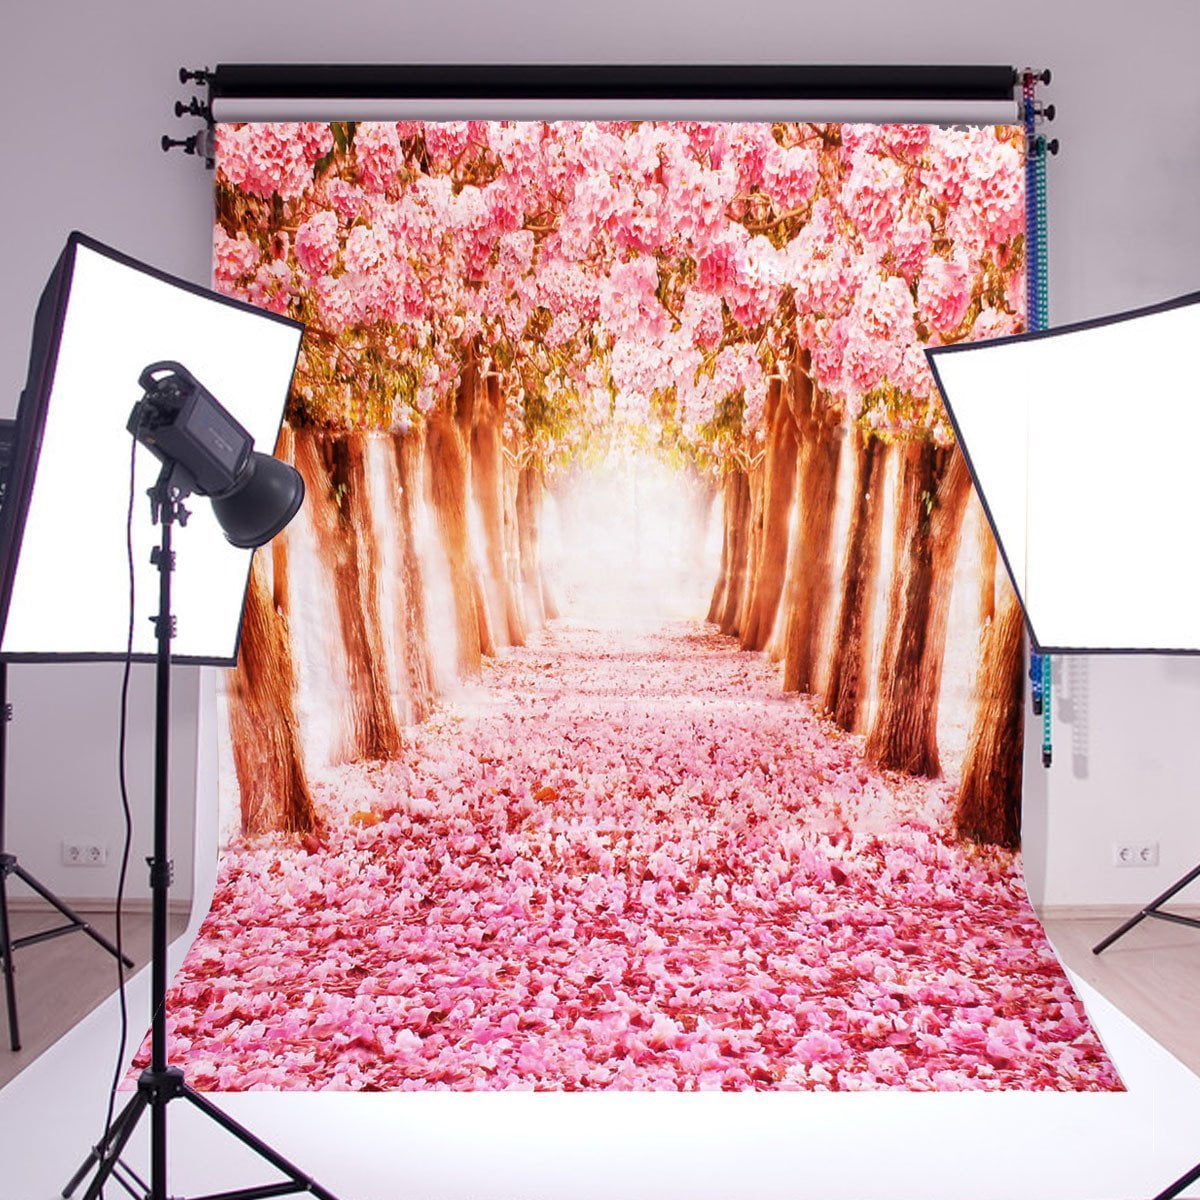 Floral 10x12 FT Backdrop Photographers,Japanese Cherry Blossom Buds Sakura Tree in Watercolor Beauty Essence Artwork Background for Photography Kids Adult Photo Booth Video Shoot Vinyl Studio Props 